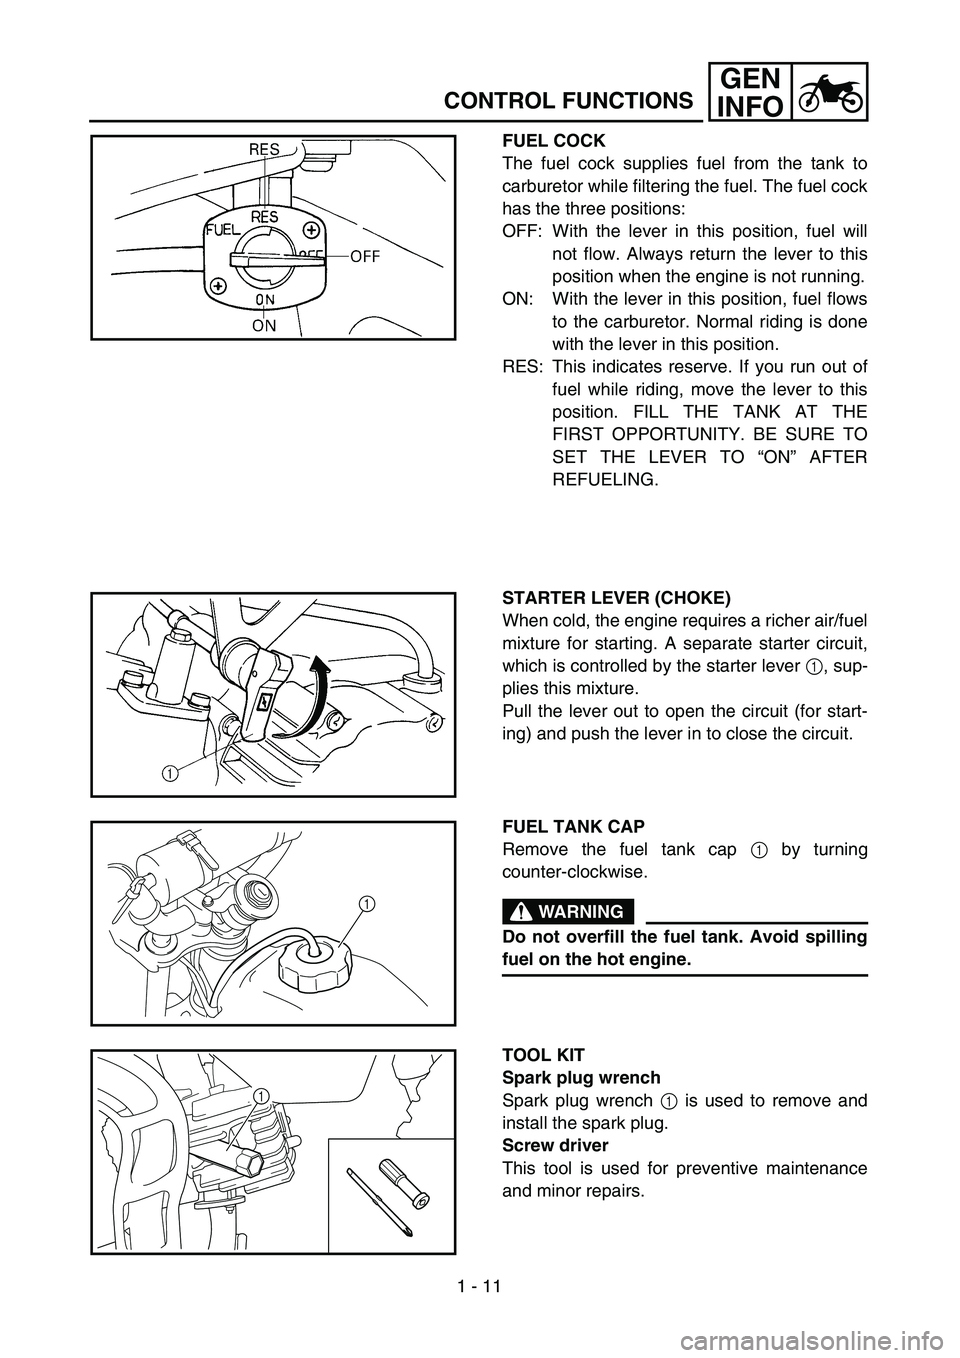 YAMAHA TTR90 2004  Owners Manual 1 - 11
GEN
INFO
CONTROL FUNCTIONS
FUEL COCK
The fuel cock supplies fuel from the tank to
carburetor while filtering the fuel. The fuel cock
has the three positions:
OFF: With the lever in this positio